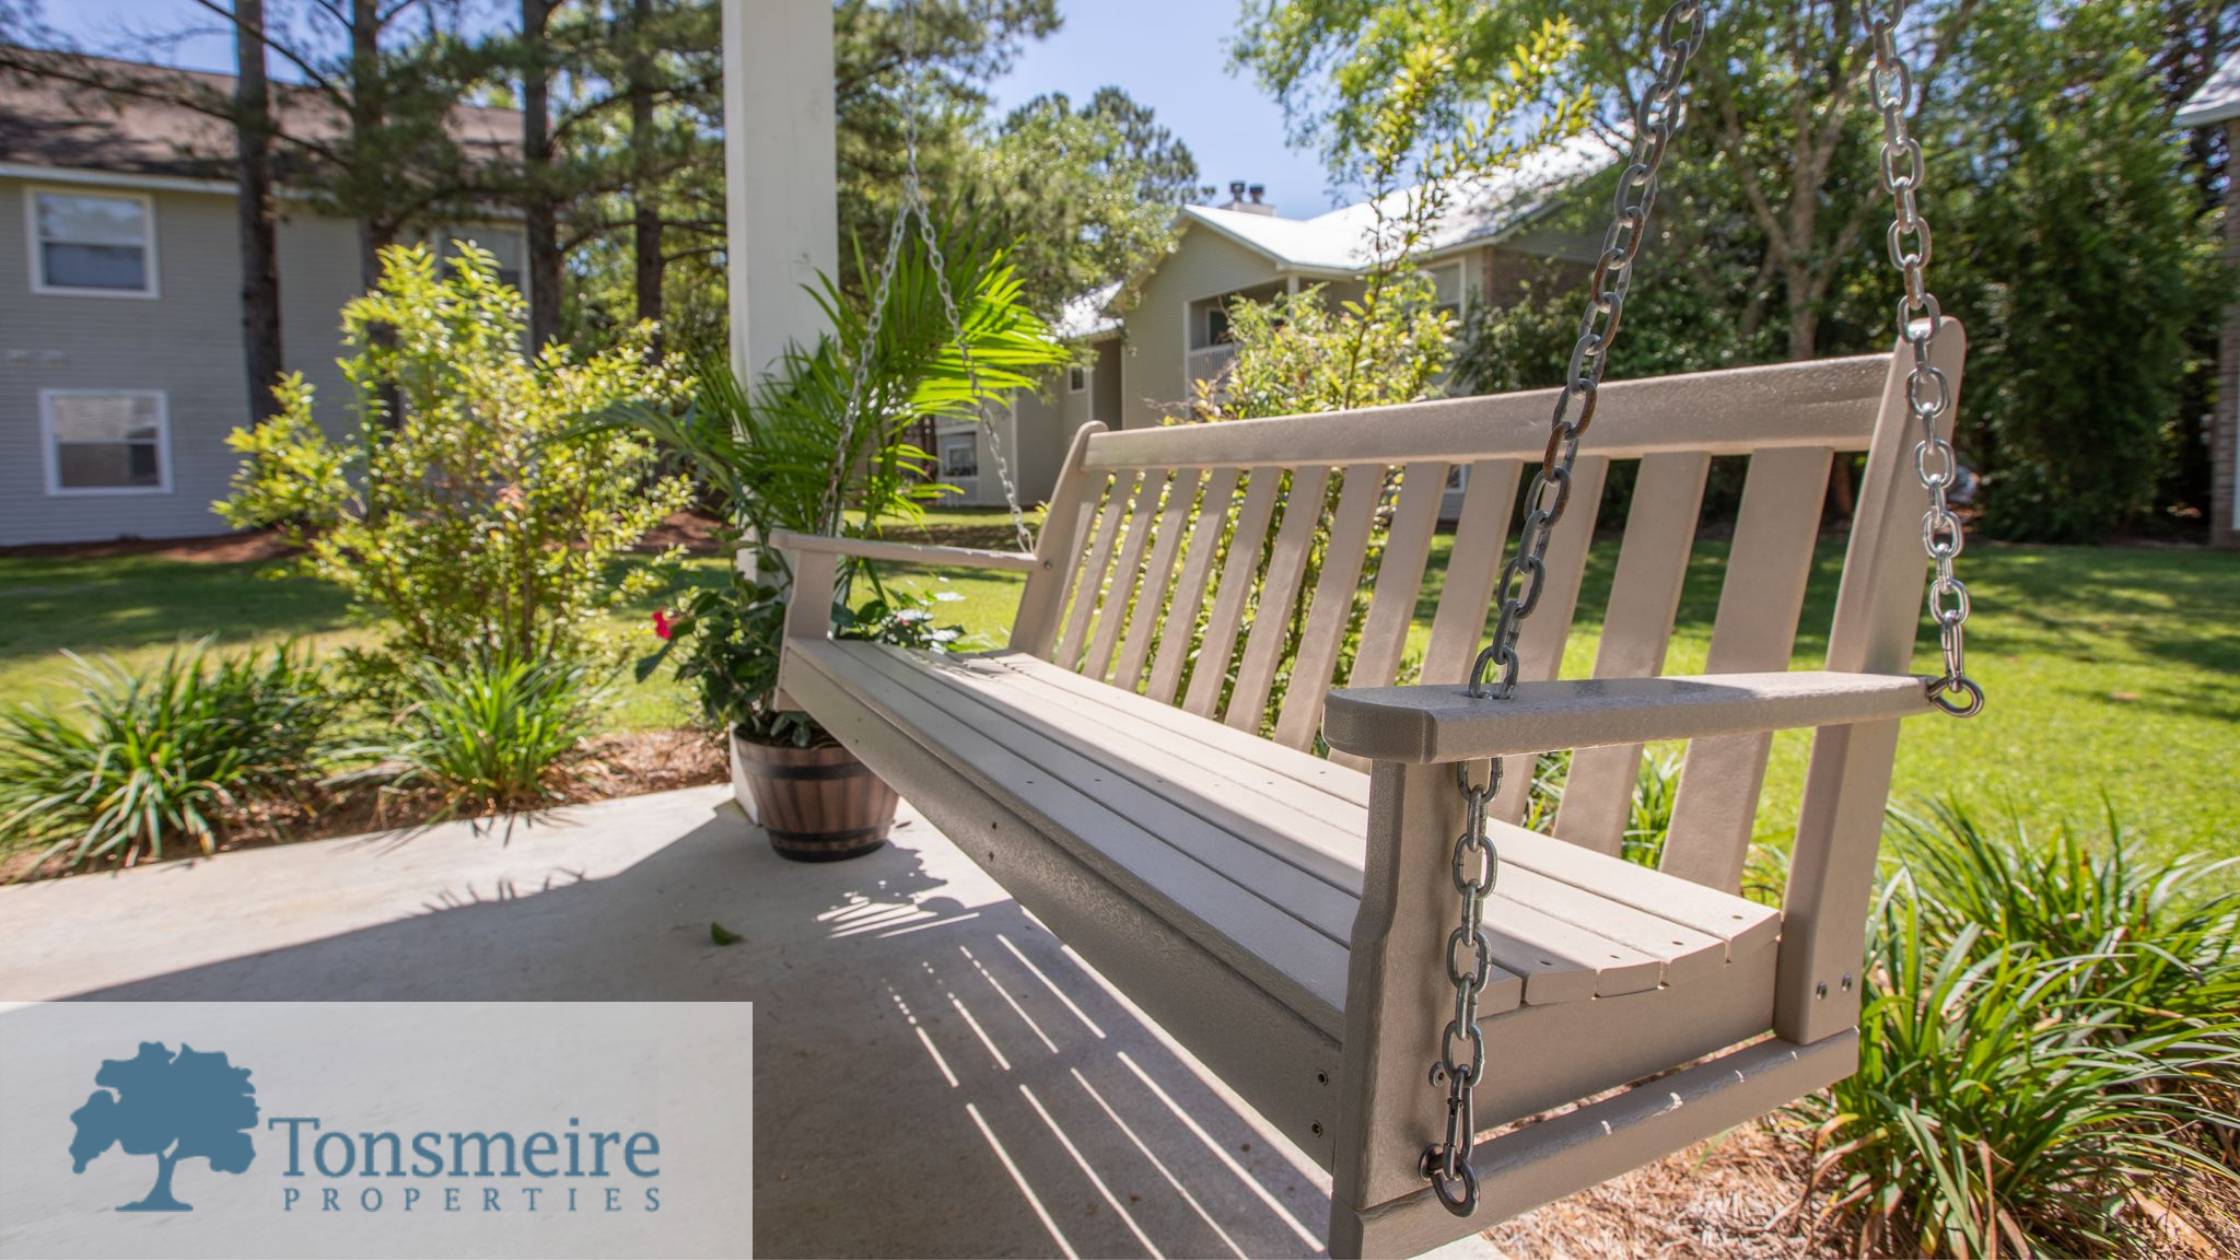 Amenities that will benefit you this spring and summer at our Tonsmeire communities